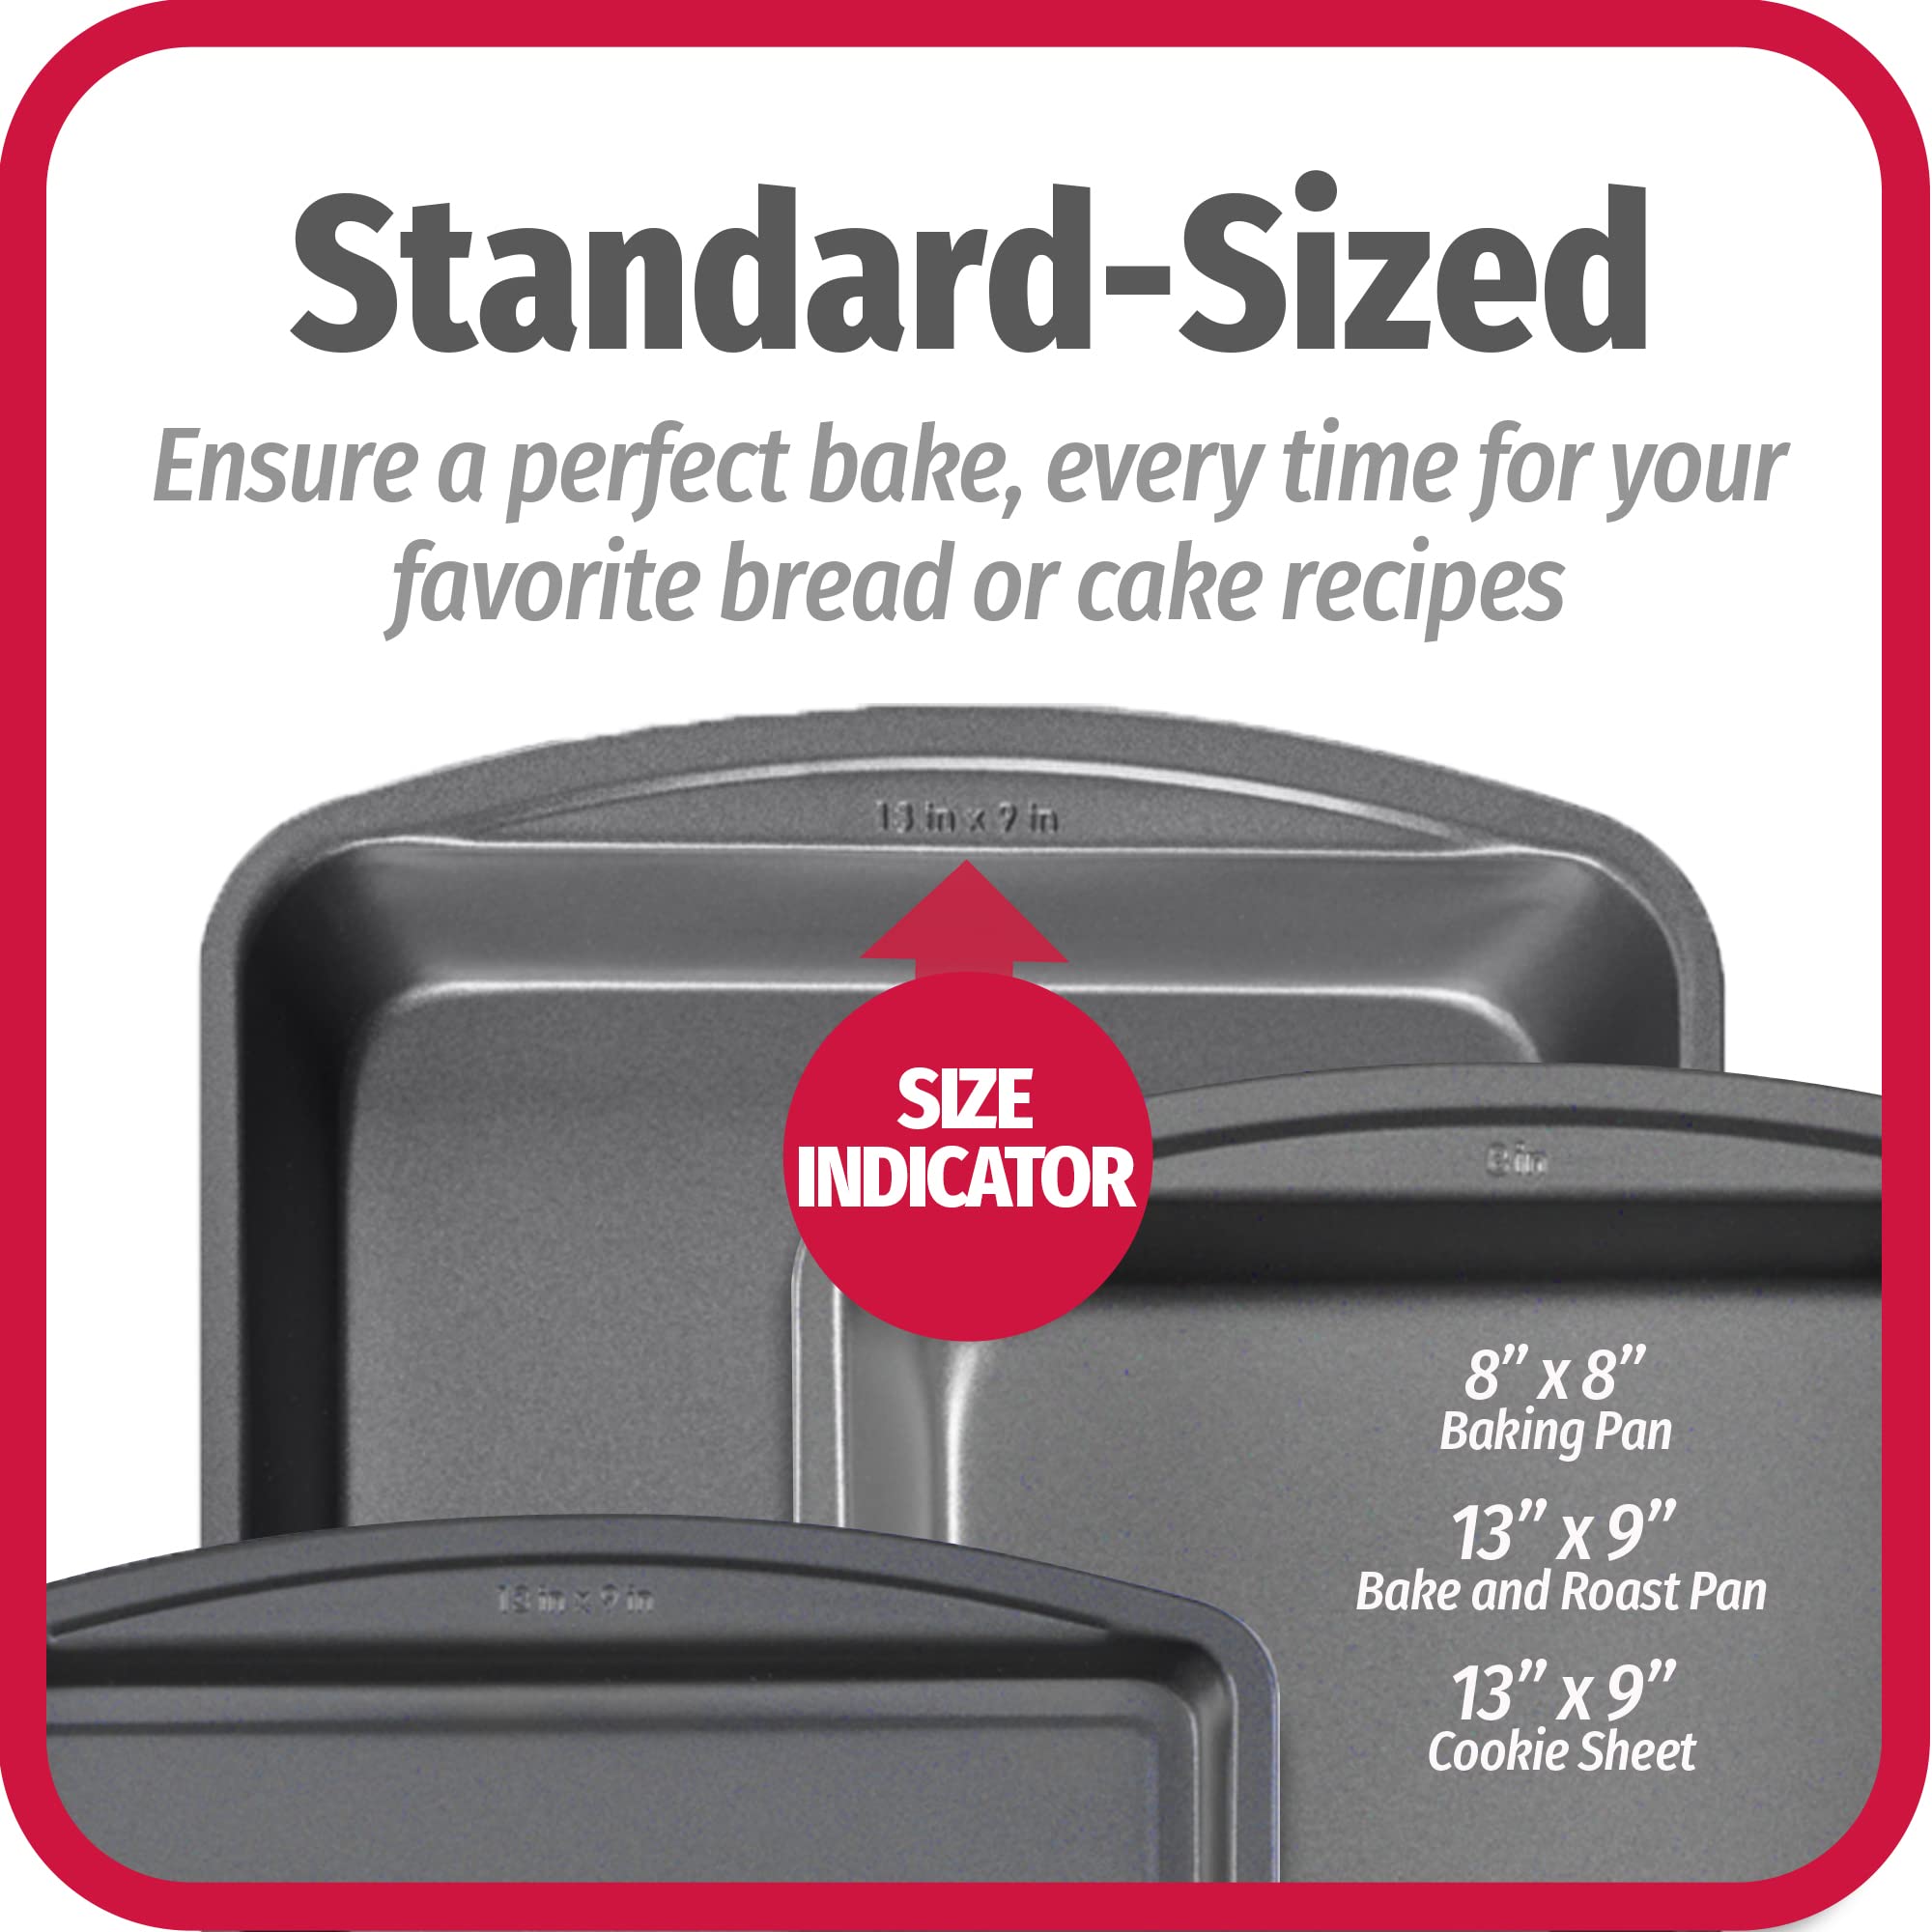 Goodcook 3 pack 8x8 Baking Pan with 13x9 Bake Pan and 13x9 Cookie Sheet